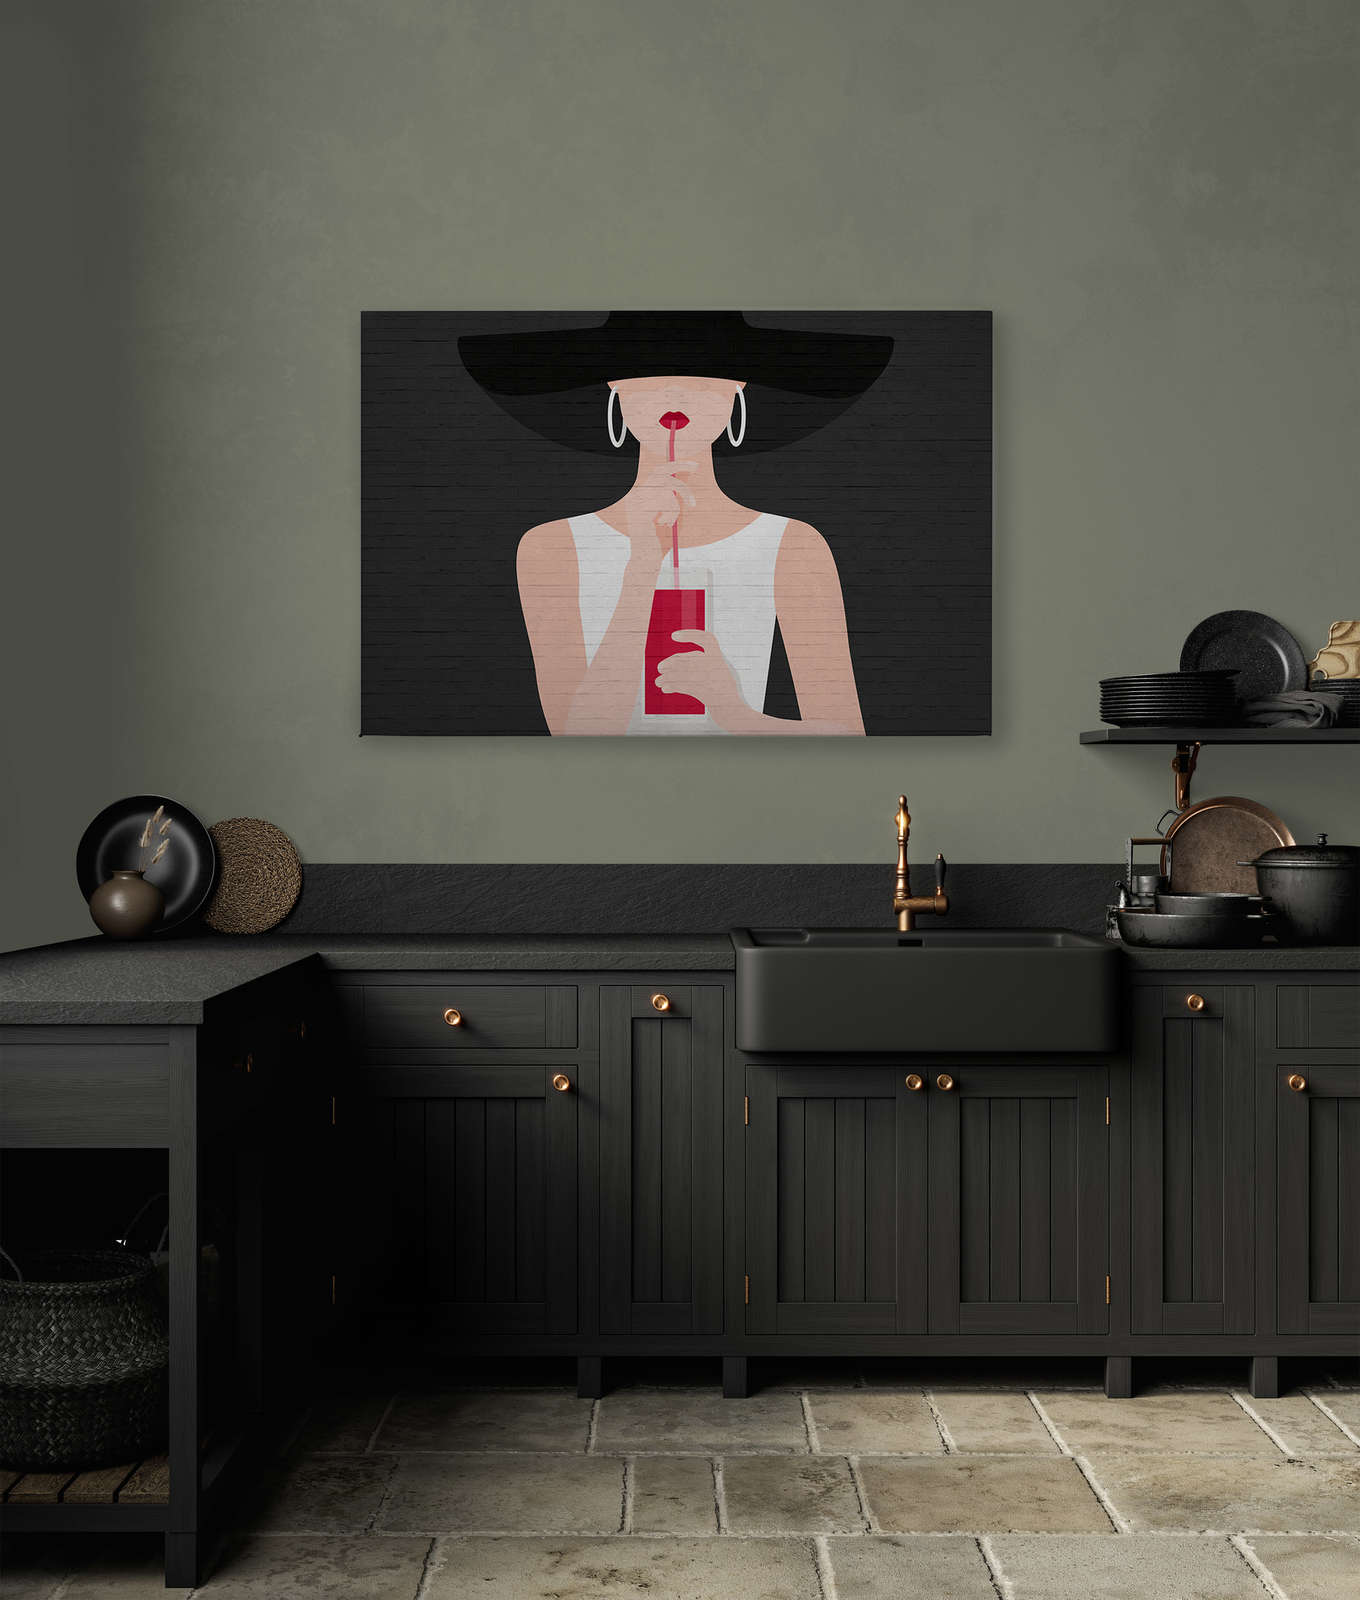             Black Canvas painting Woman with Cocktail & Masonry - 1.20 m x 0.80 m
        